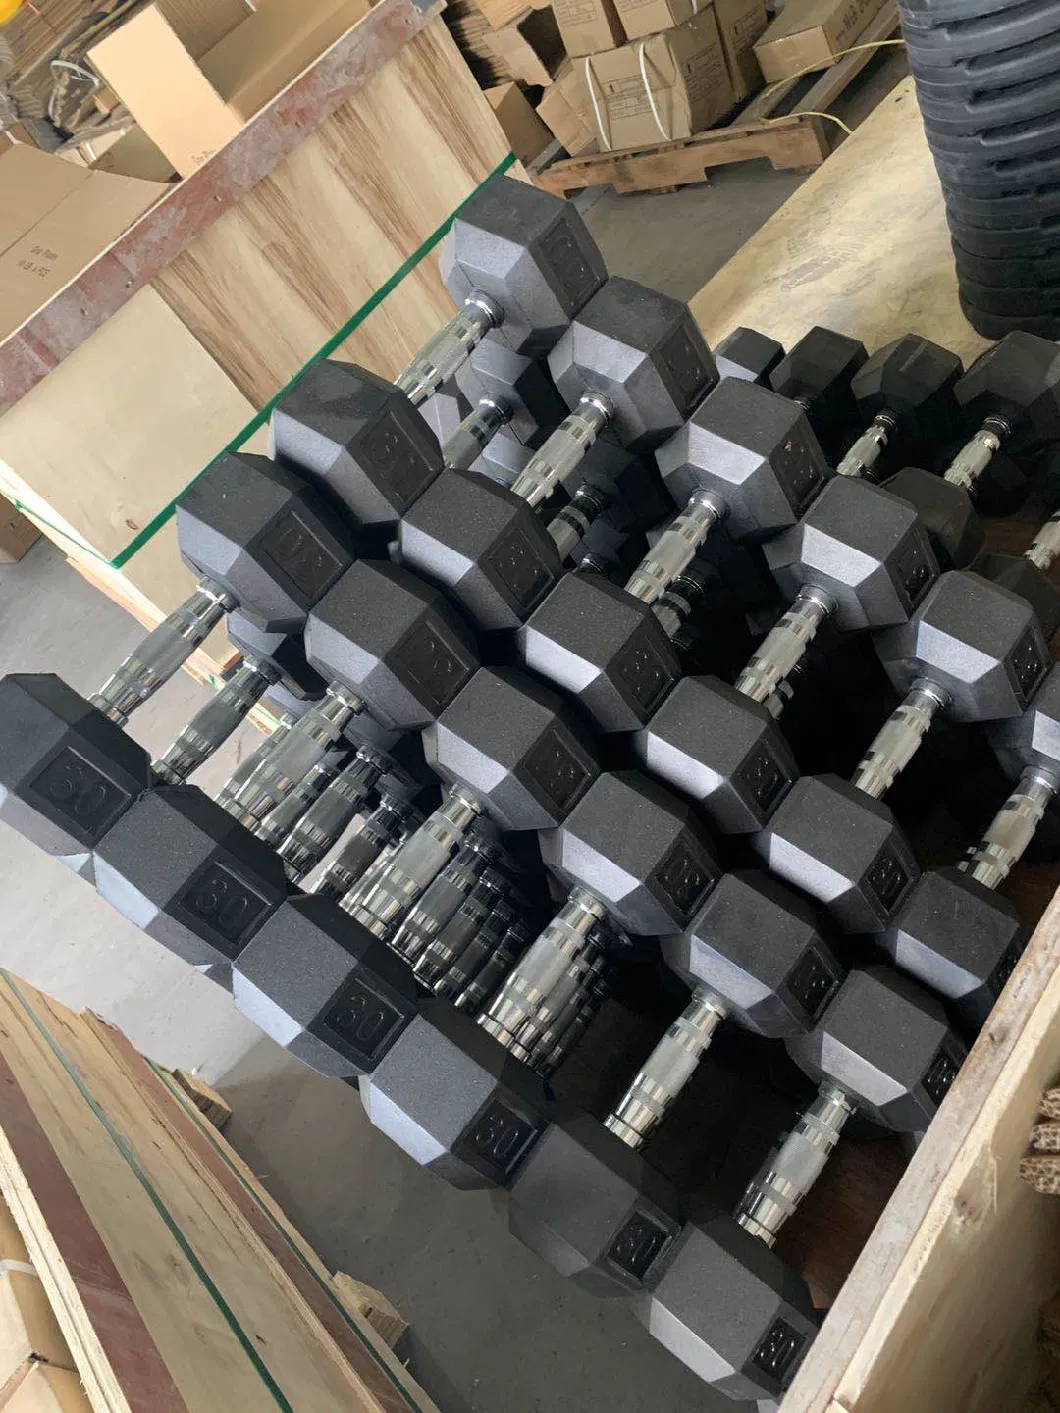 Factory Wholesale Direct Supply Gym Equipment Home Gym Rubber Hex Dumbbell with Inner Cast Iron Material